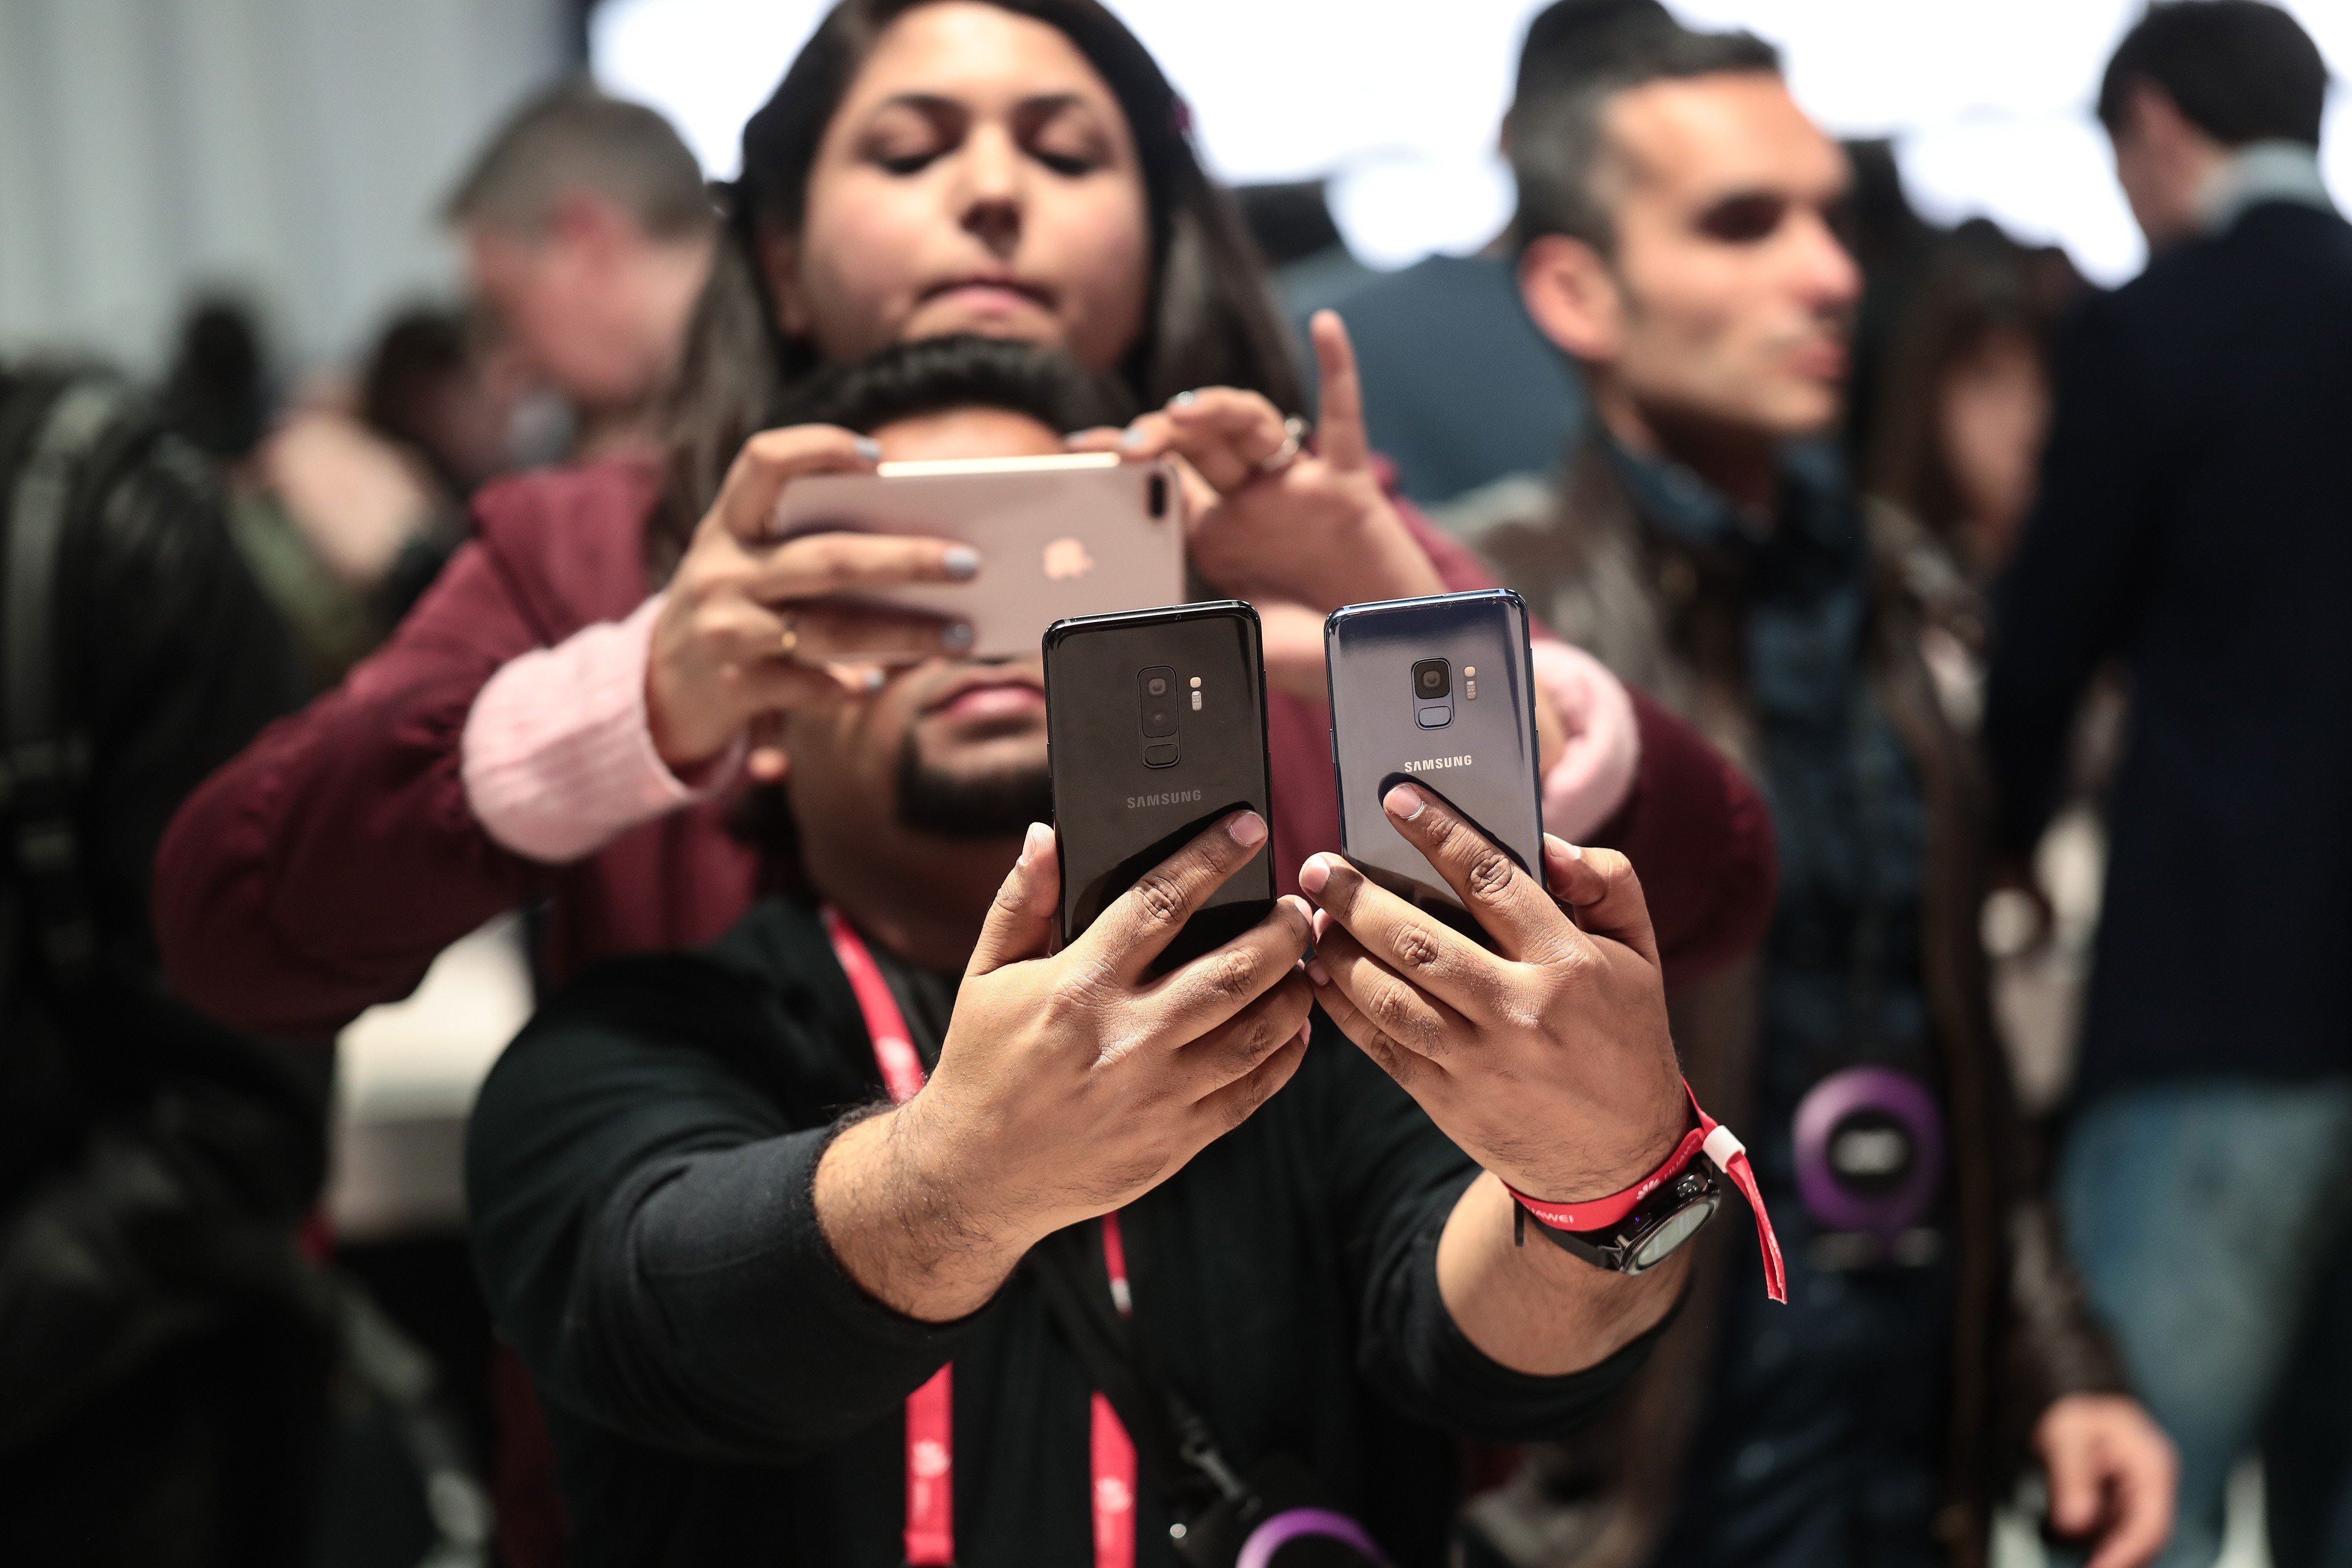 Ahead of the opening of the Mobile World Congress, major brands are putting their best foot forward for an industry reeling from the first global decline in smartphone sales.